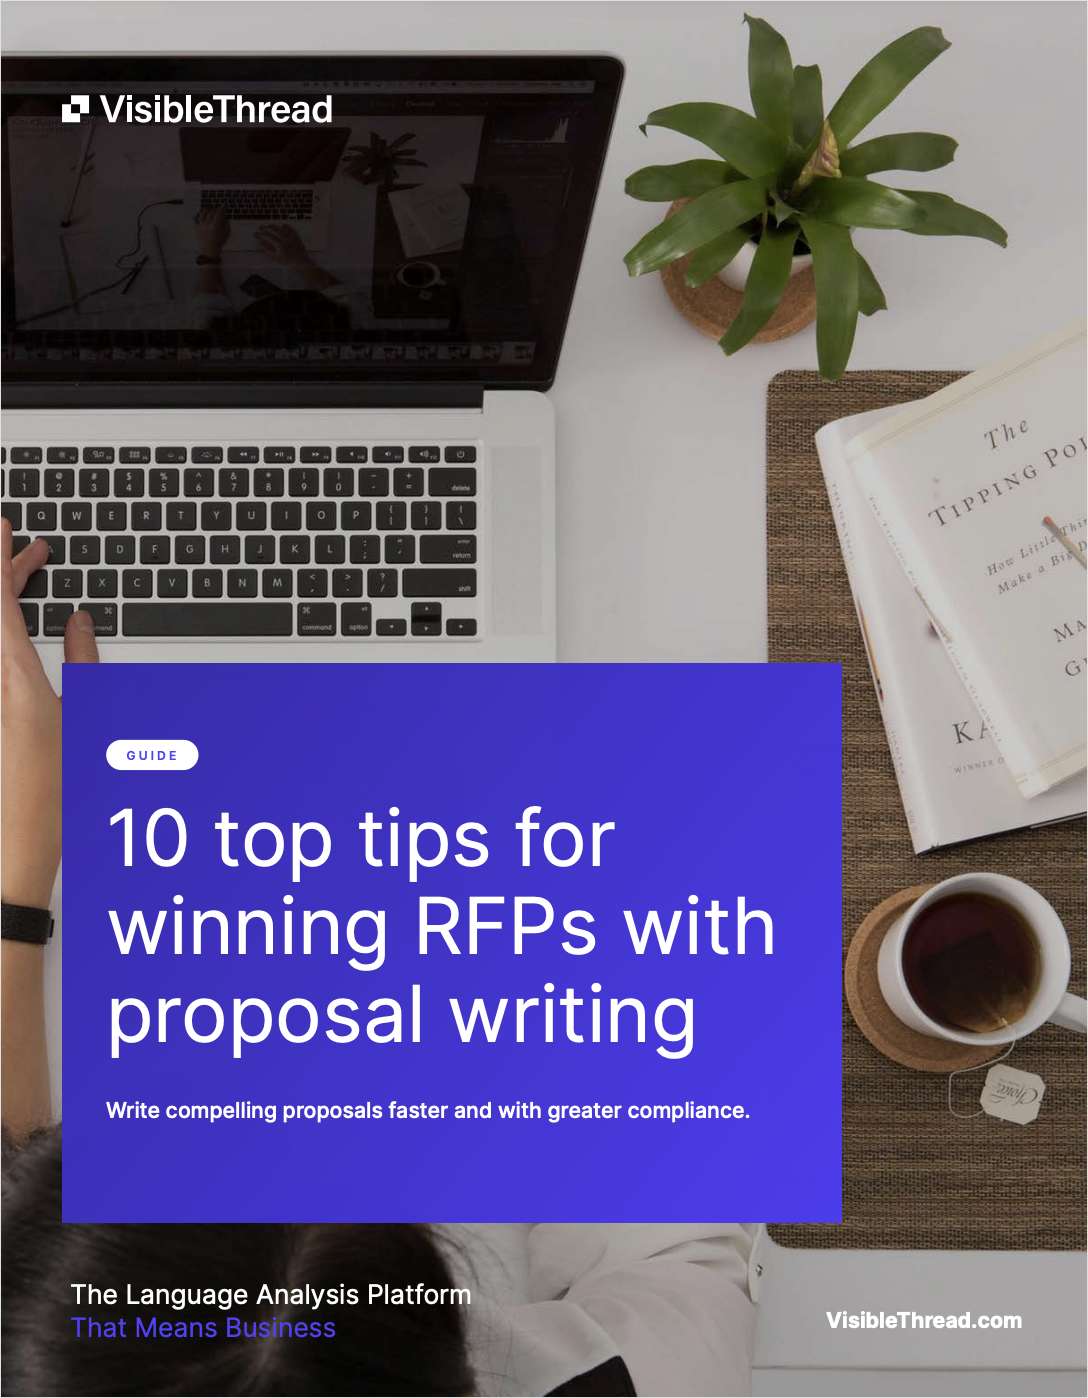 10 top tips for winning RFPs with proposal writing